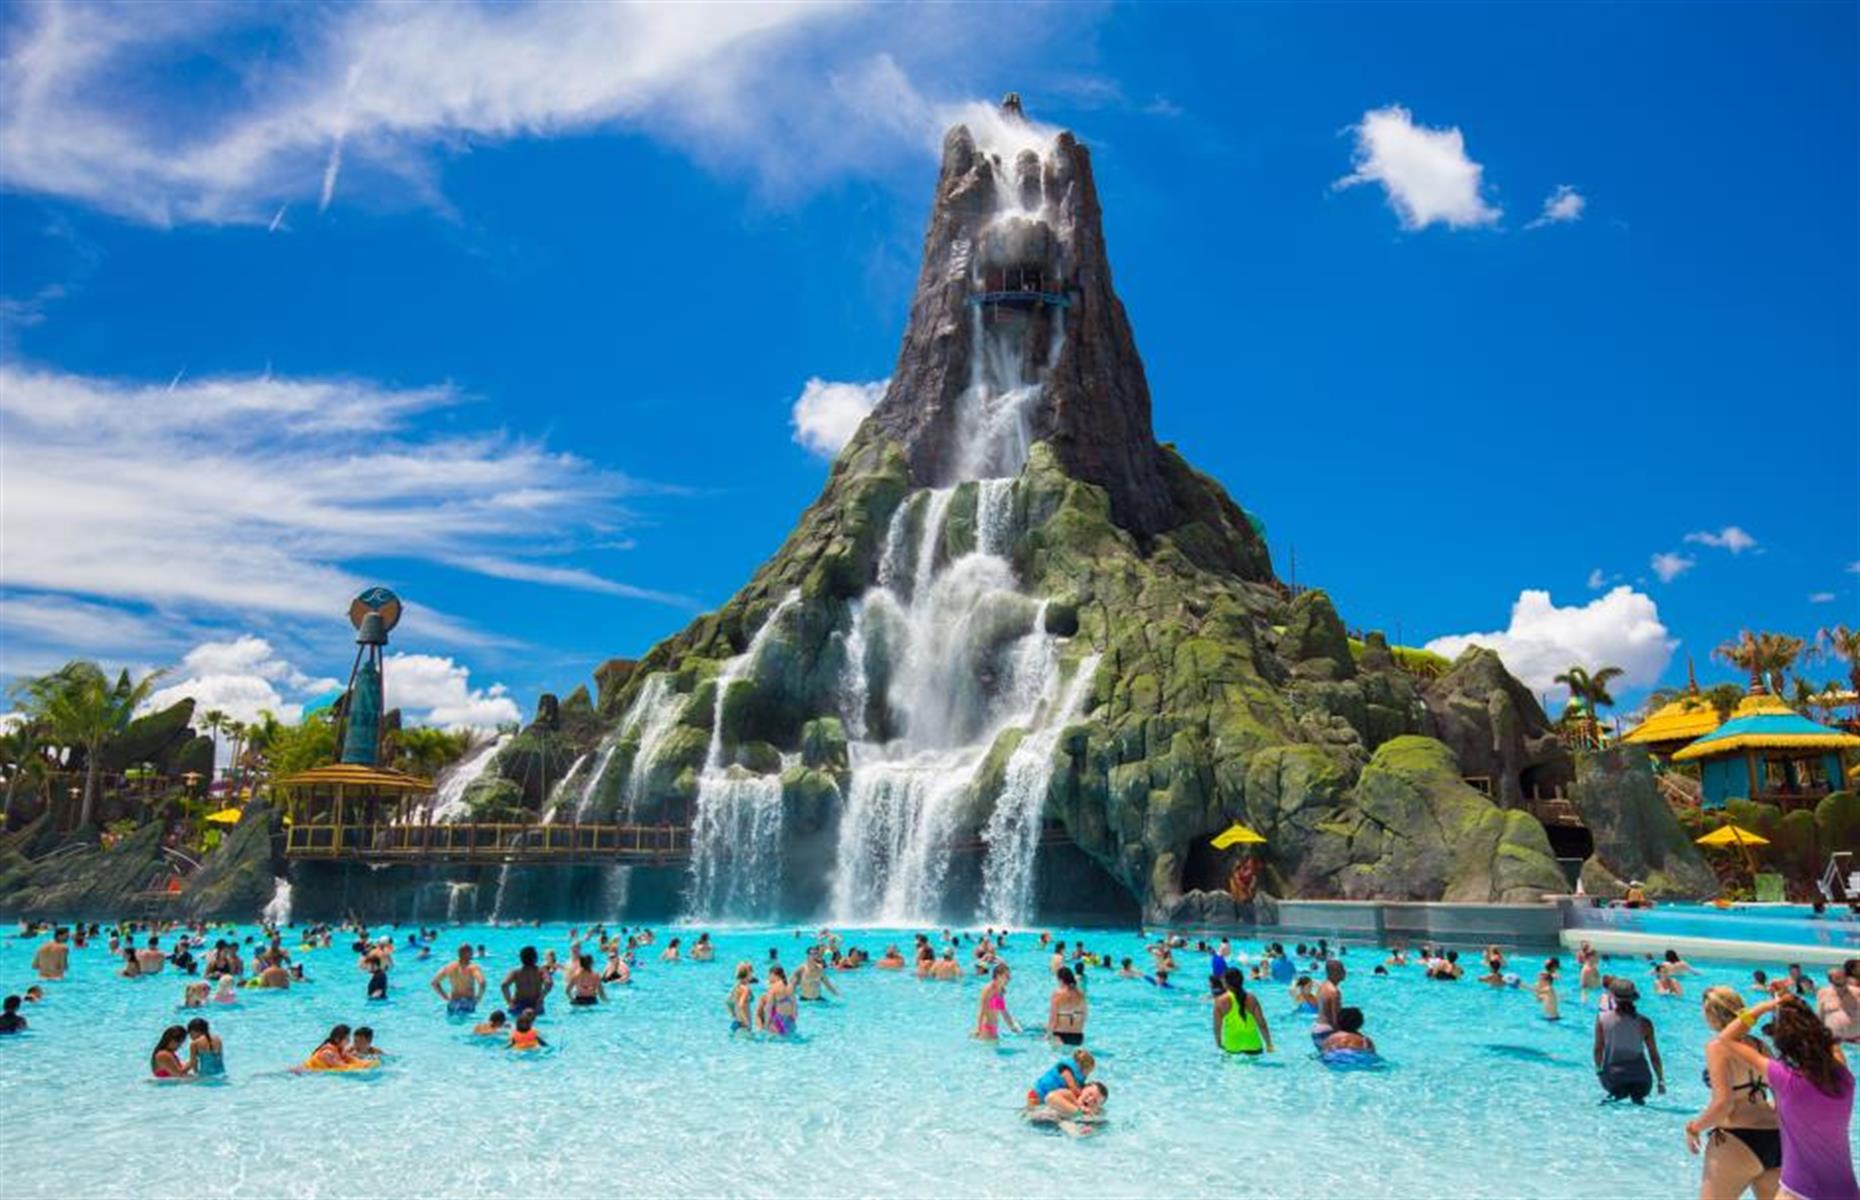 <p>From meandering around lazy rivers and lapping up the waves to plummeting down vertical drops, there are plenty of thrills to be found in waterparks. Whether you like to relax and unwind or get the adrenaline pumping, we've found some of the world's wettest and wildest attractions that are fun for the whole family.</p>  <p><strong>Click or scroll through the gallery to see our selection of the best waterparks for families...</strong></p>